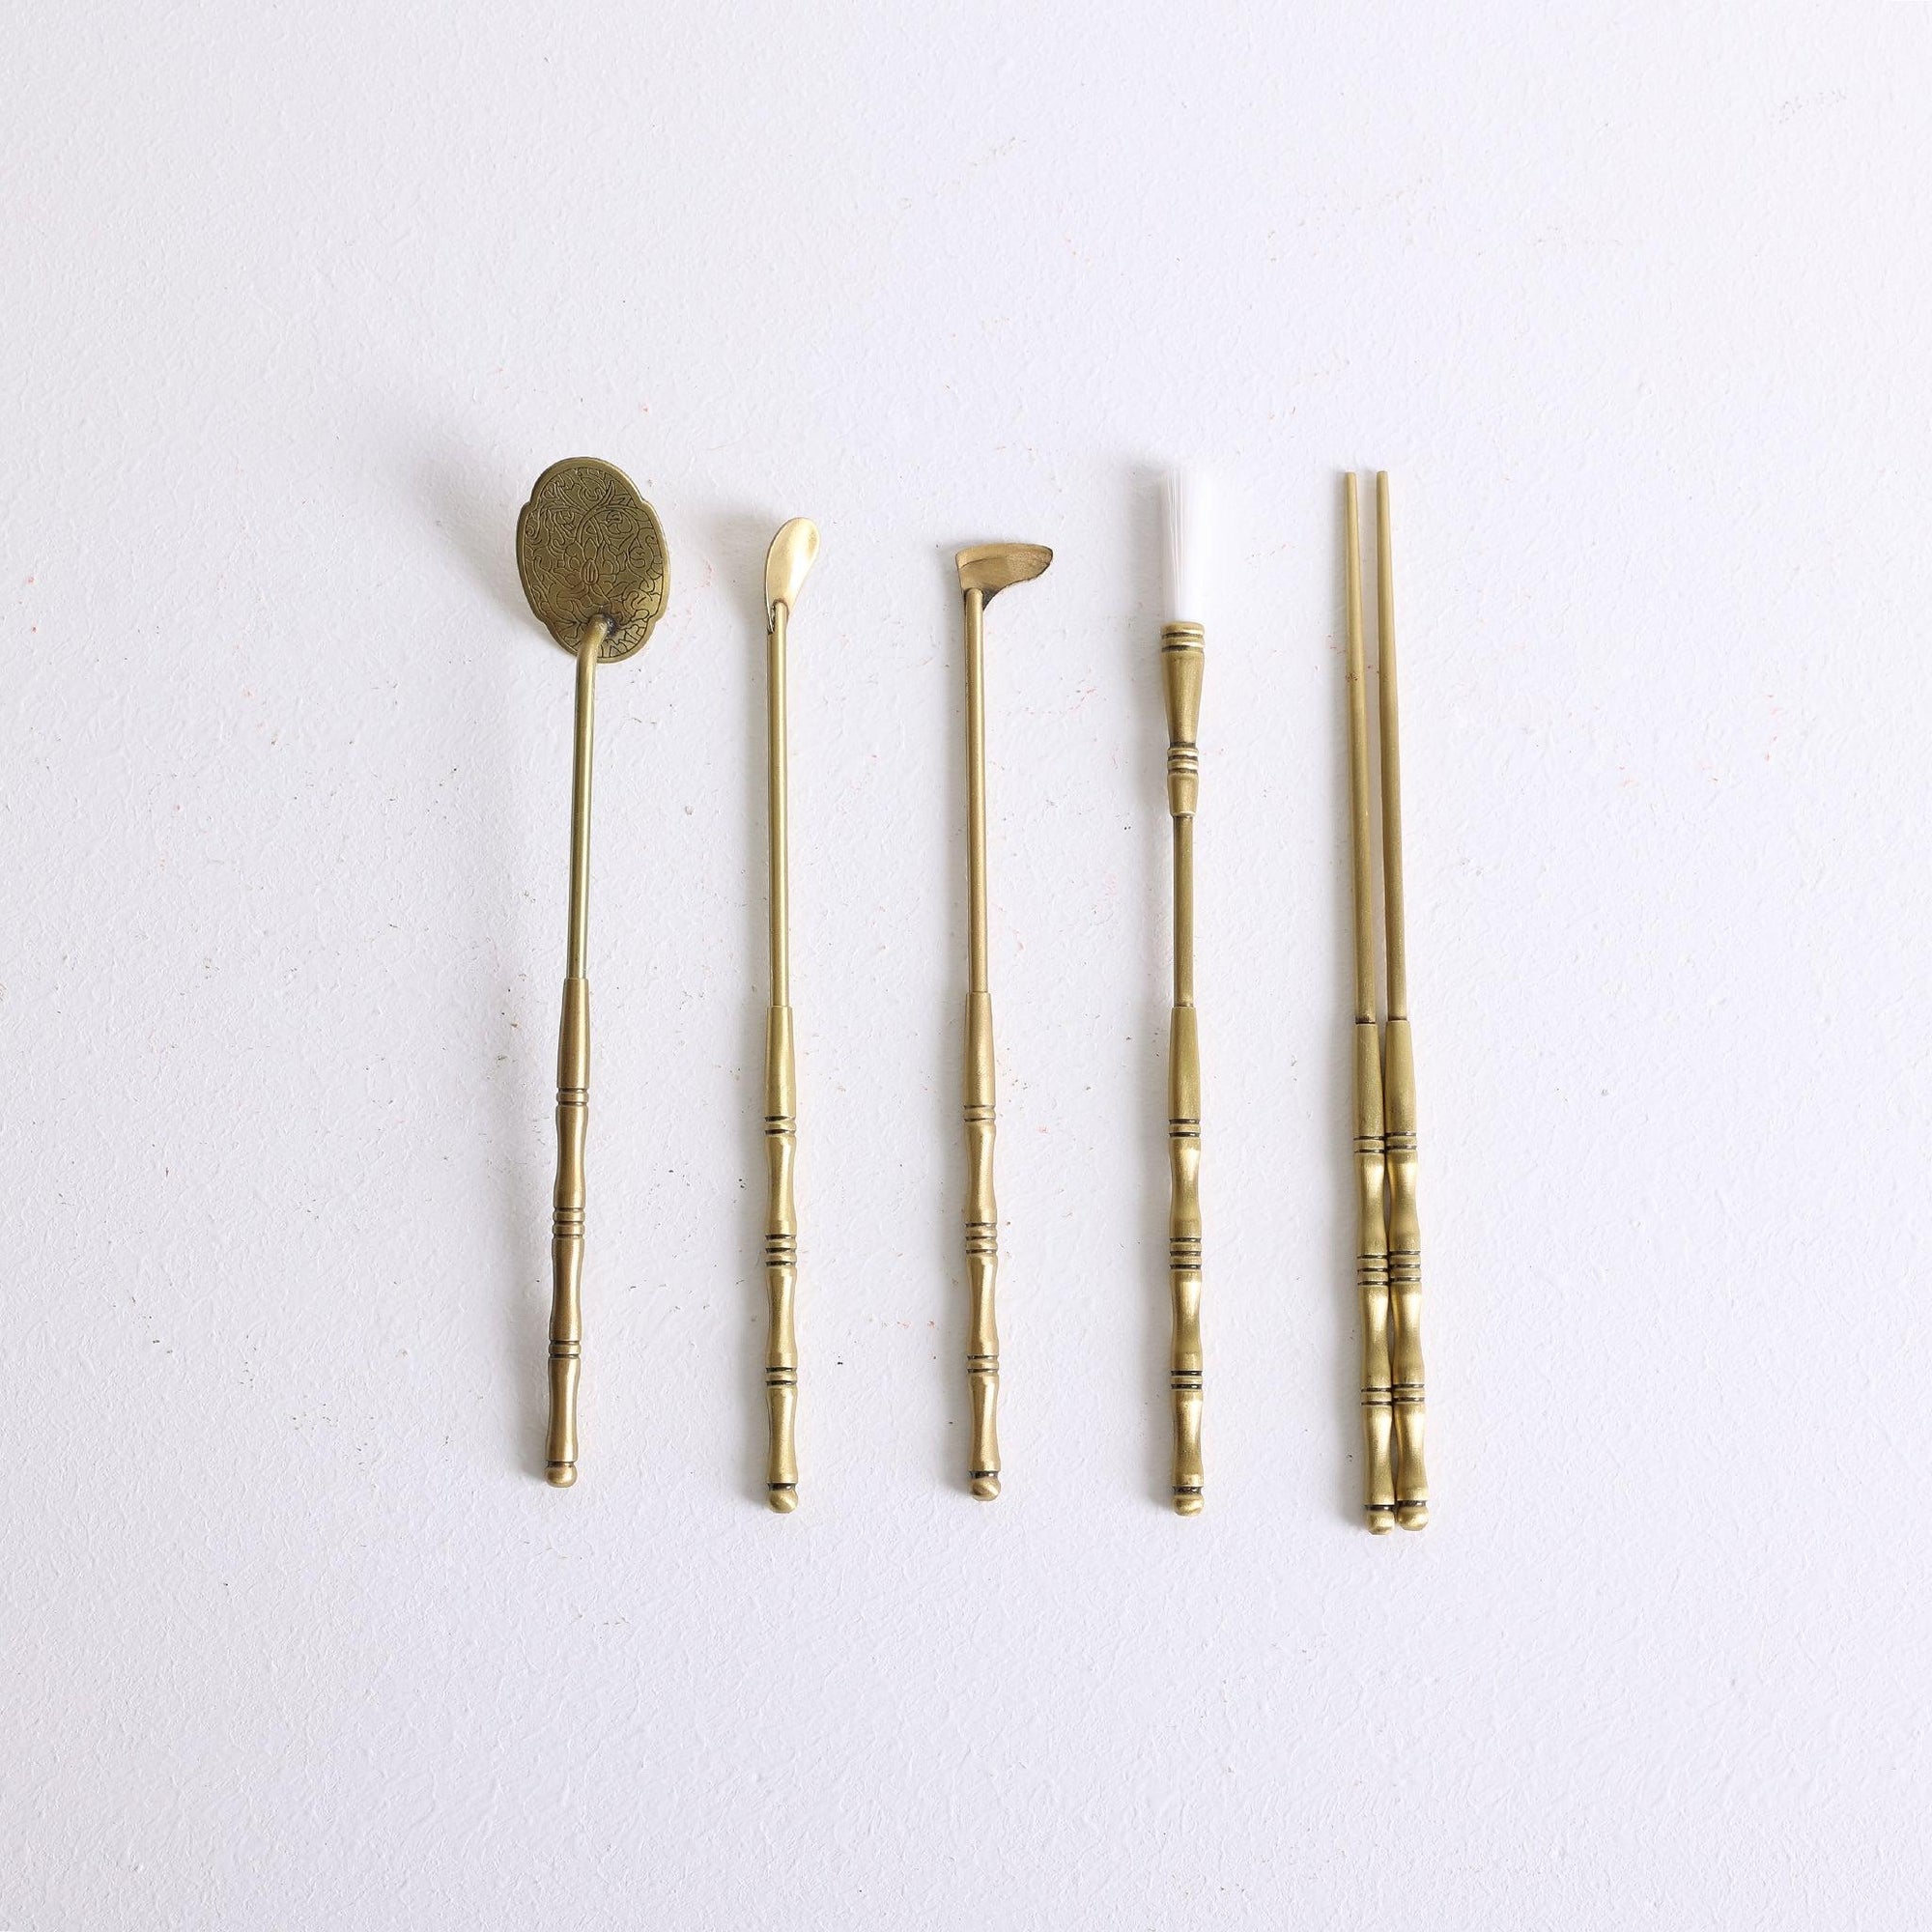 A five-piece bronze toolkit for incense powder displayed in wooden tray